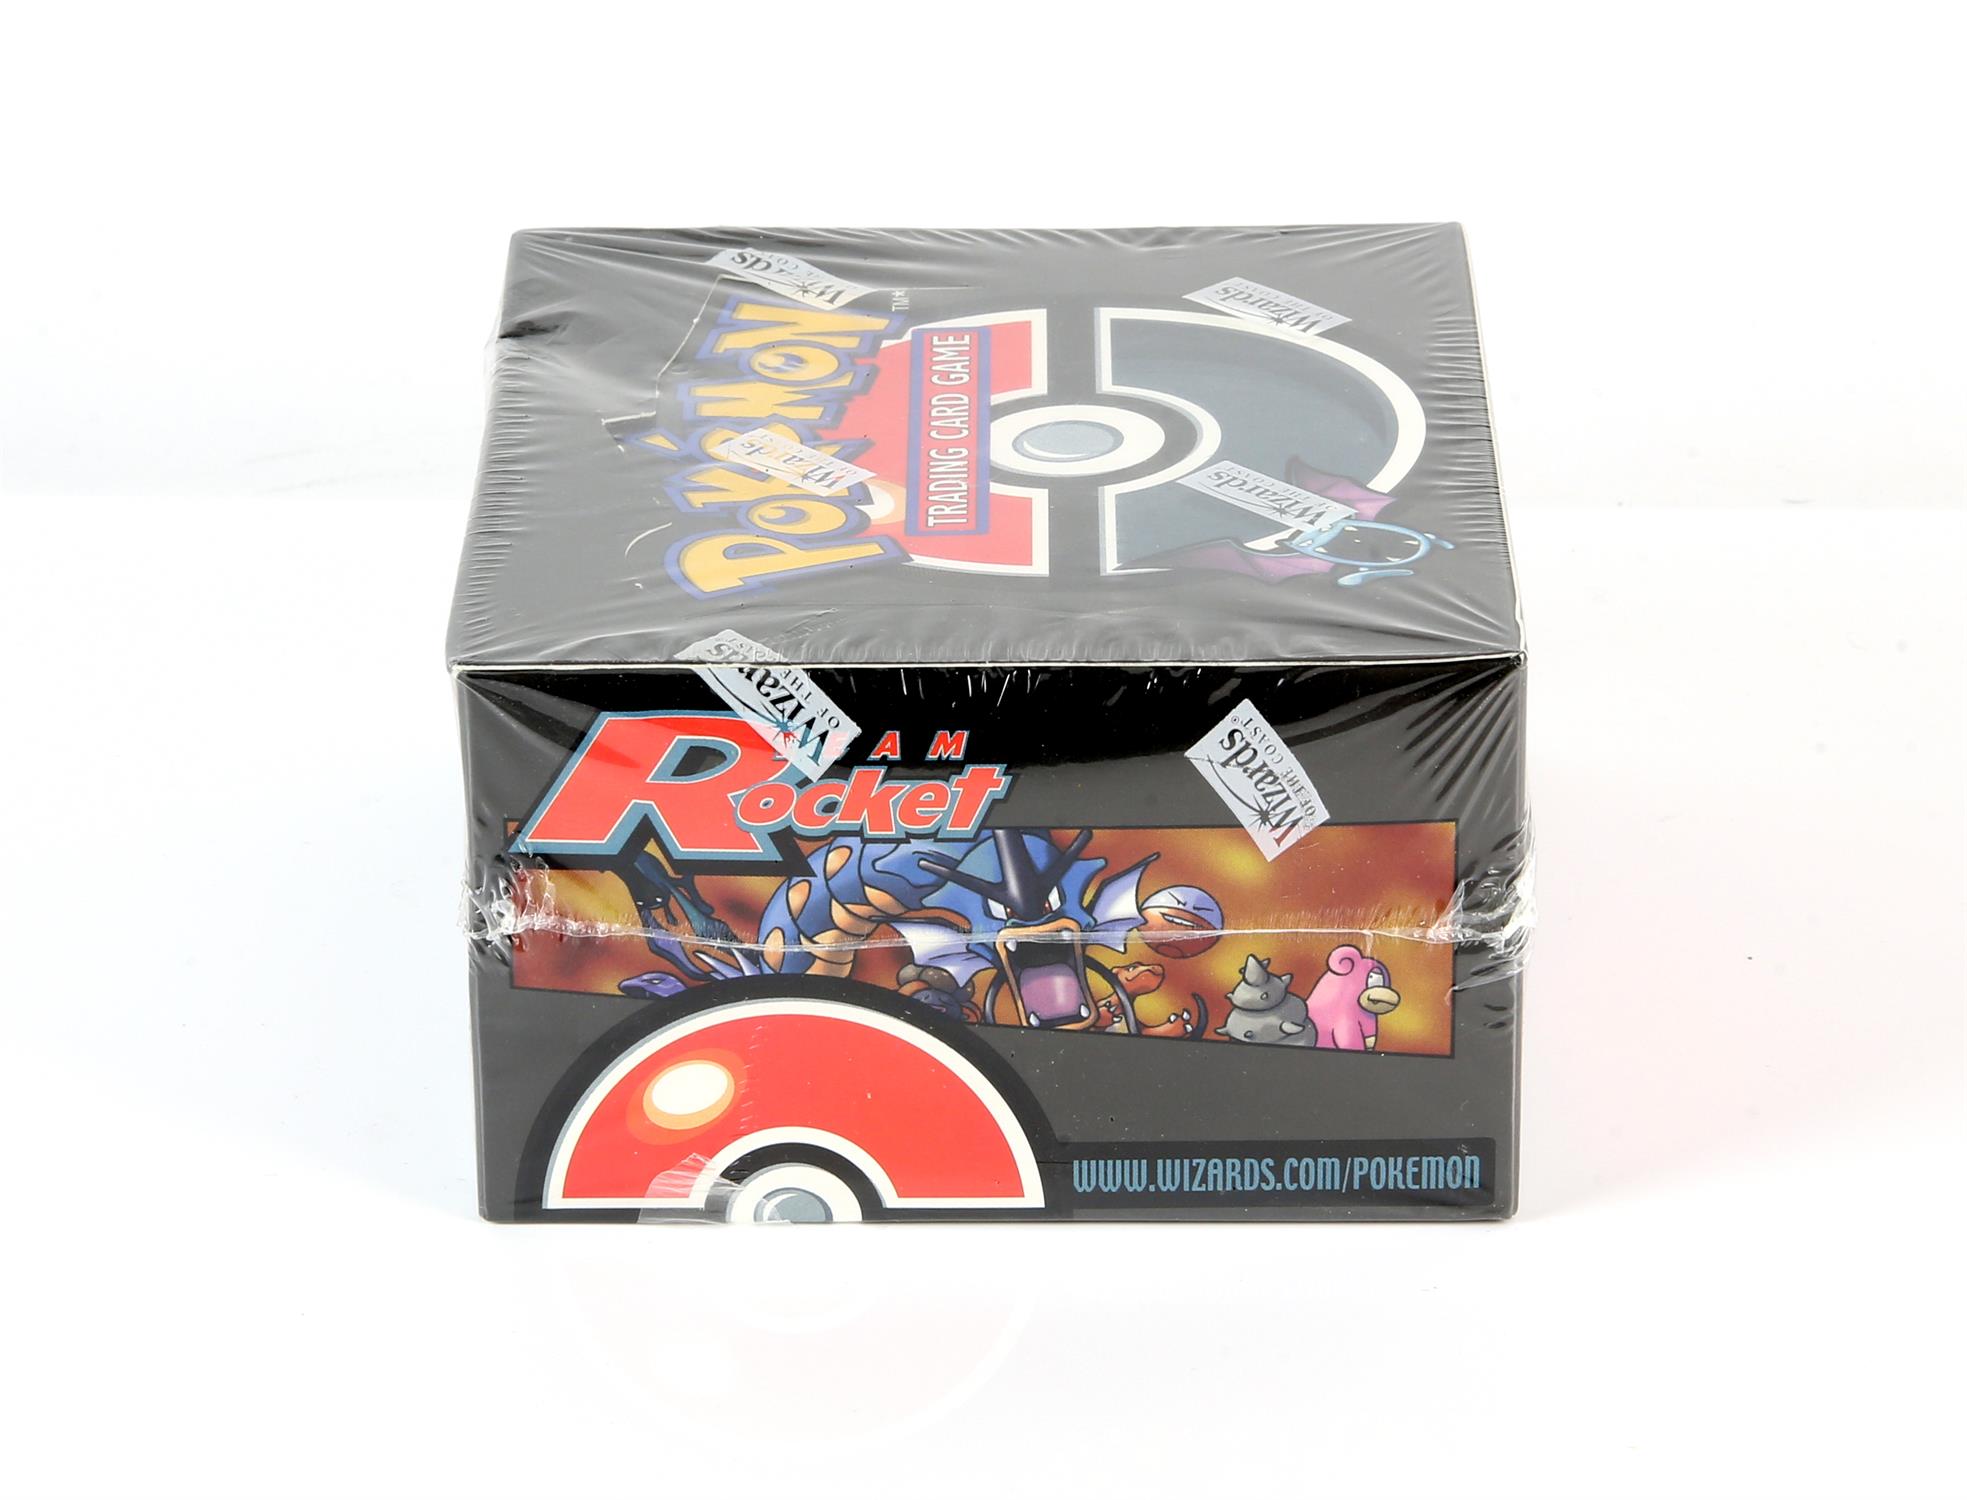 Pokémon TCG. Pokémon Team Rocket Unlimited Booster box Sealed. This was the fifth expansion set - Image 2 of 5